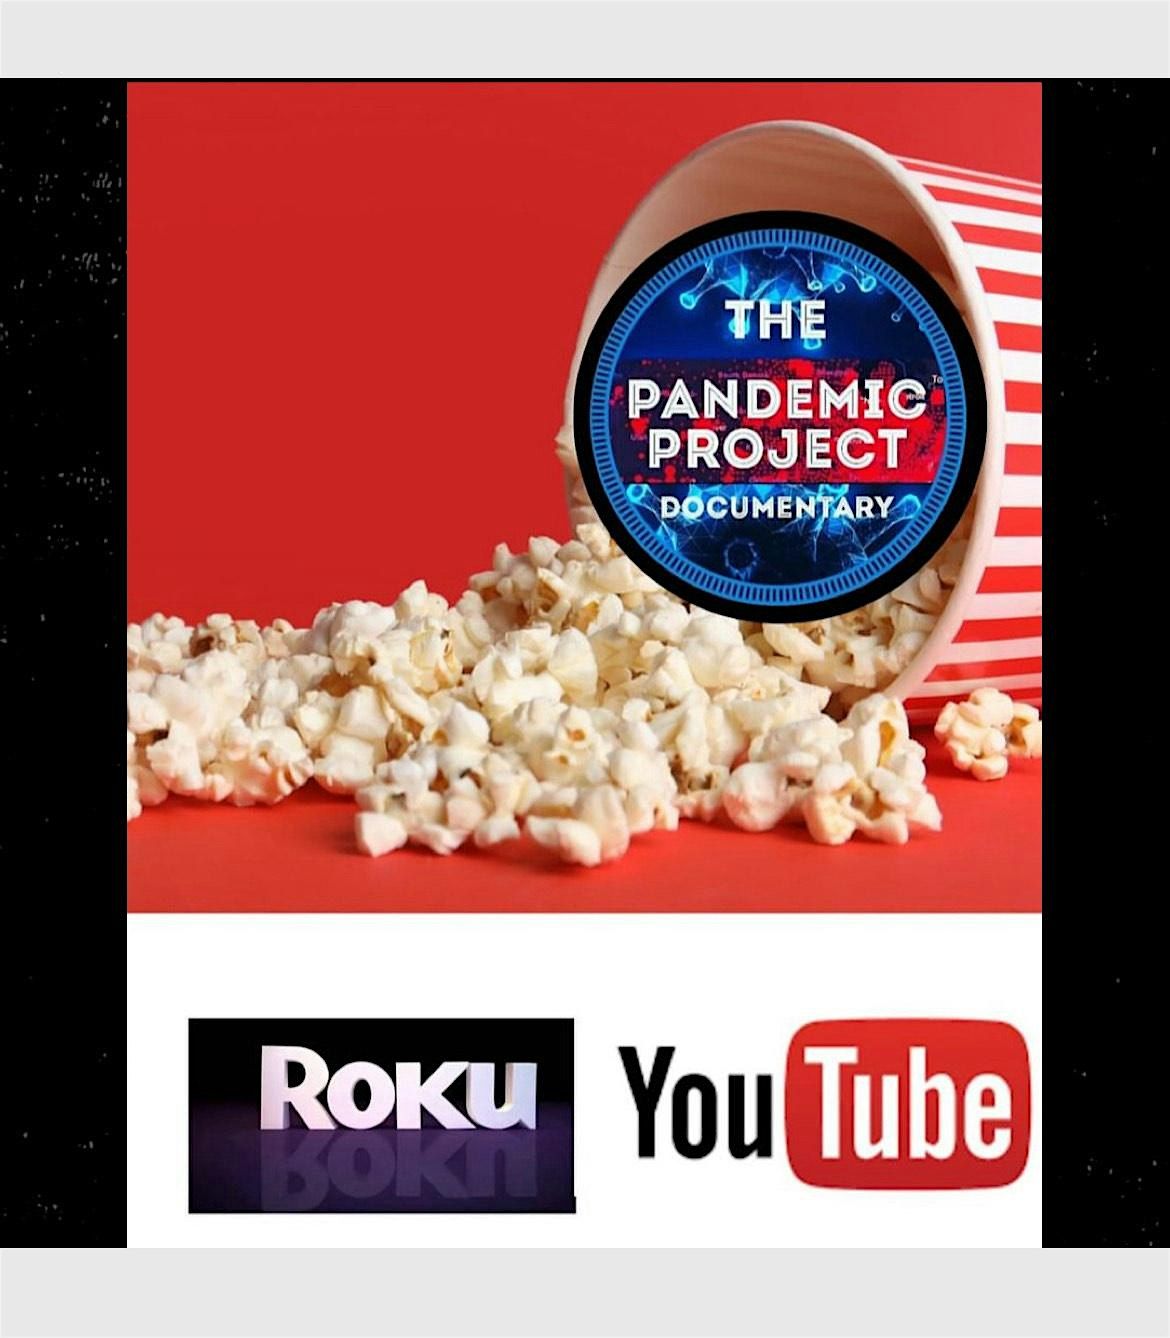 The Pandemic Project Documentary Streaming on Roku & YouTube